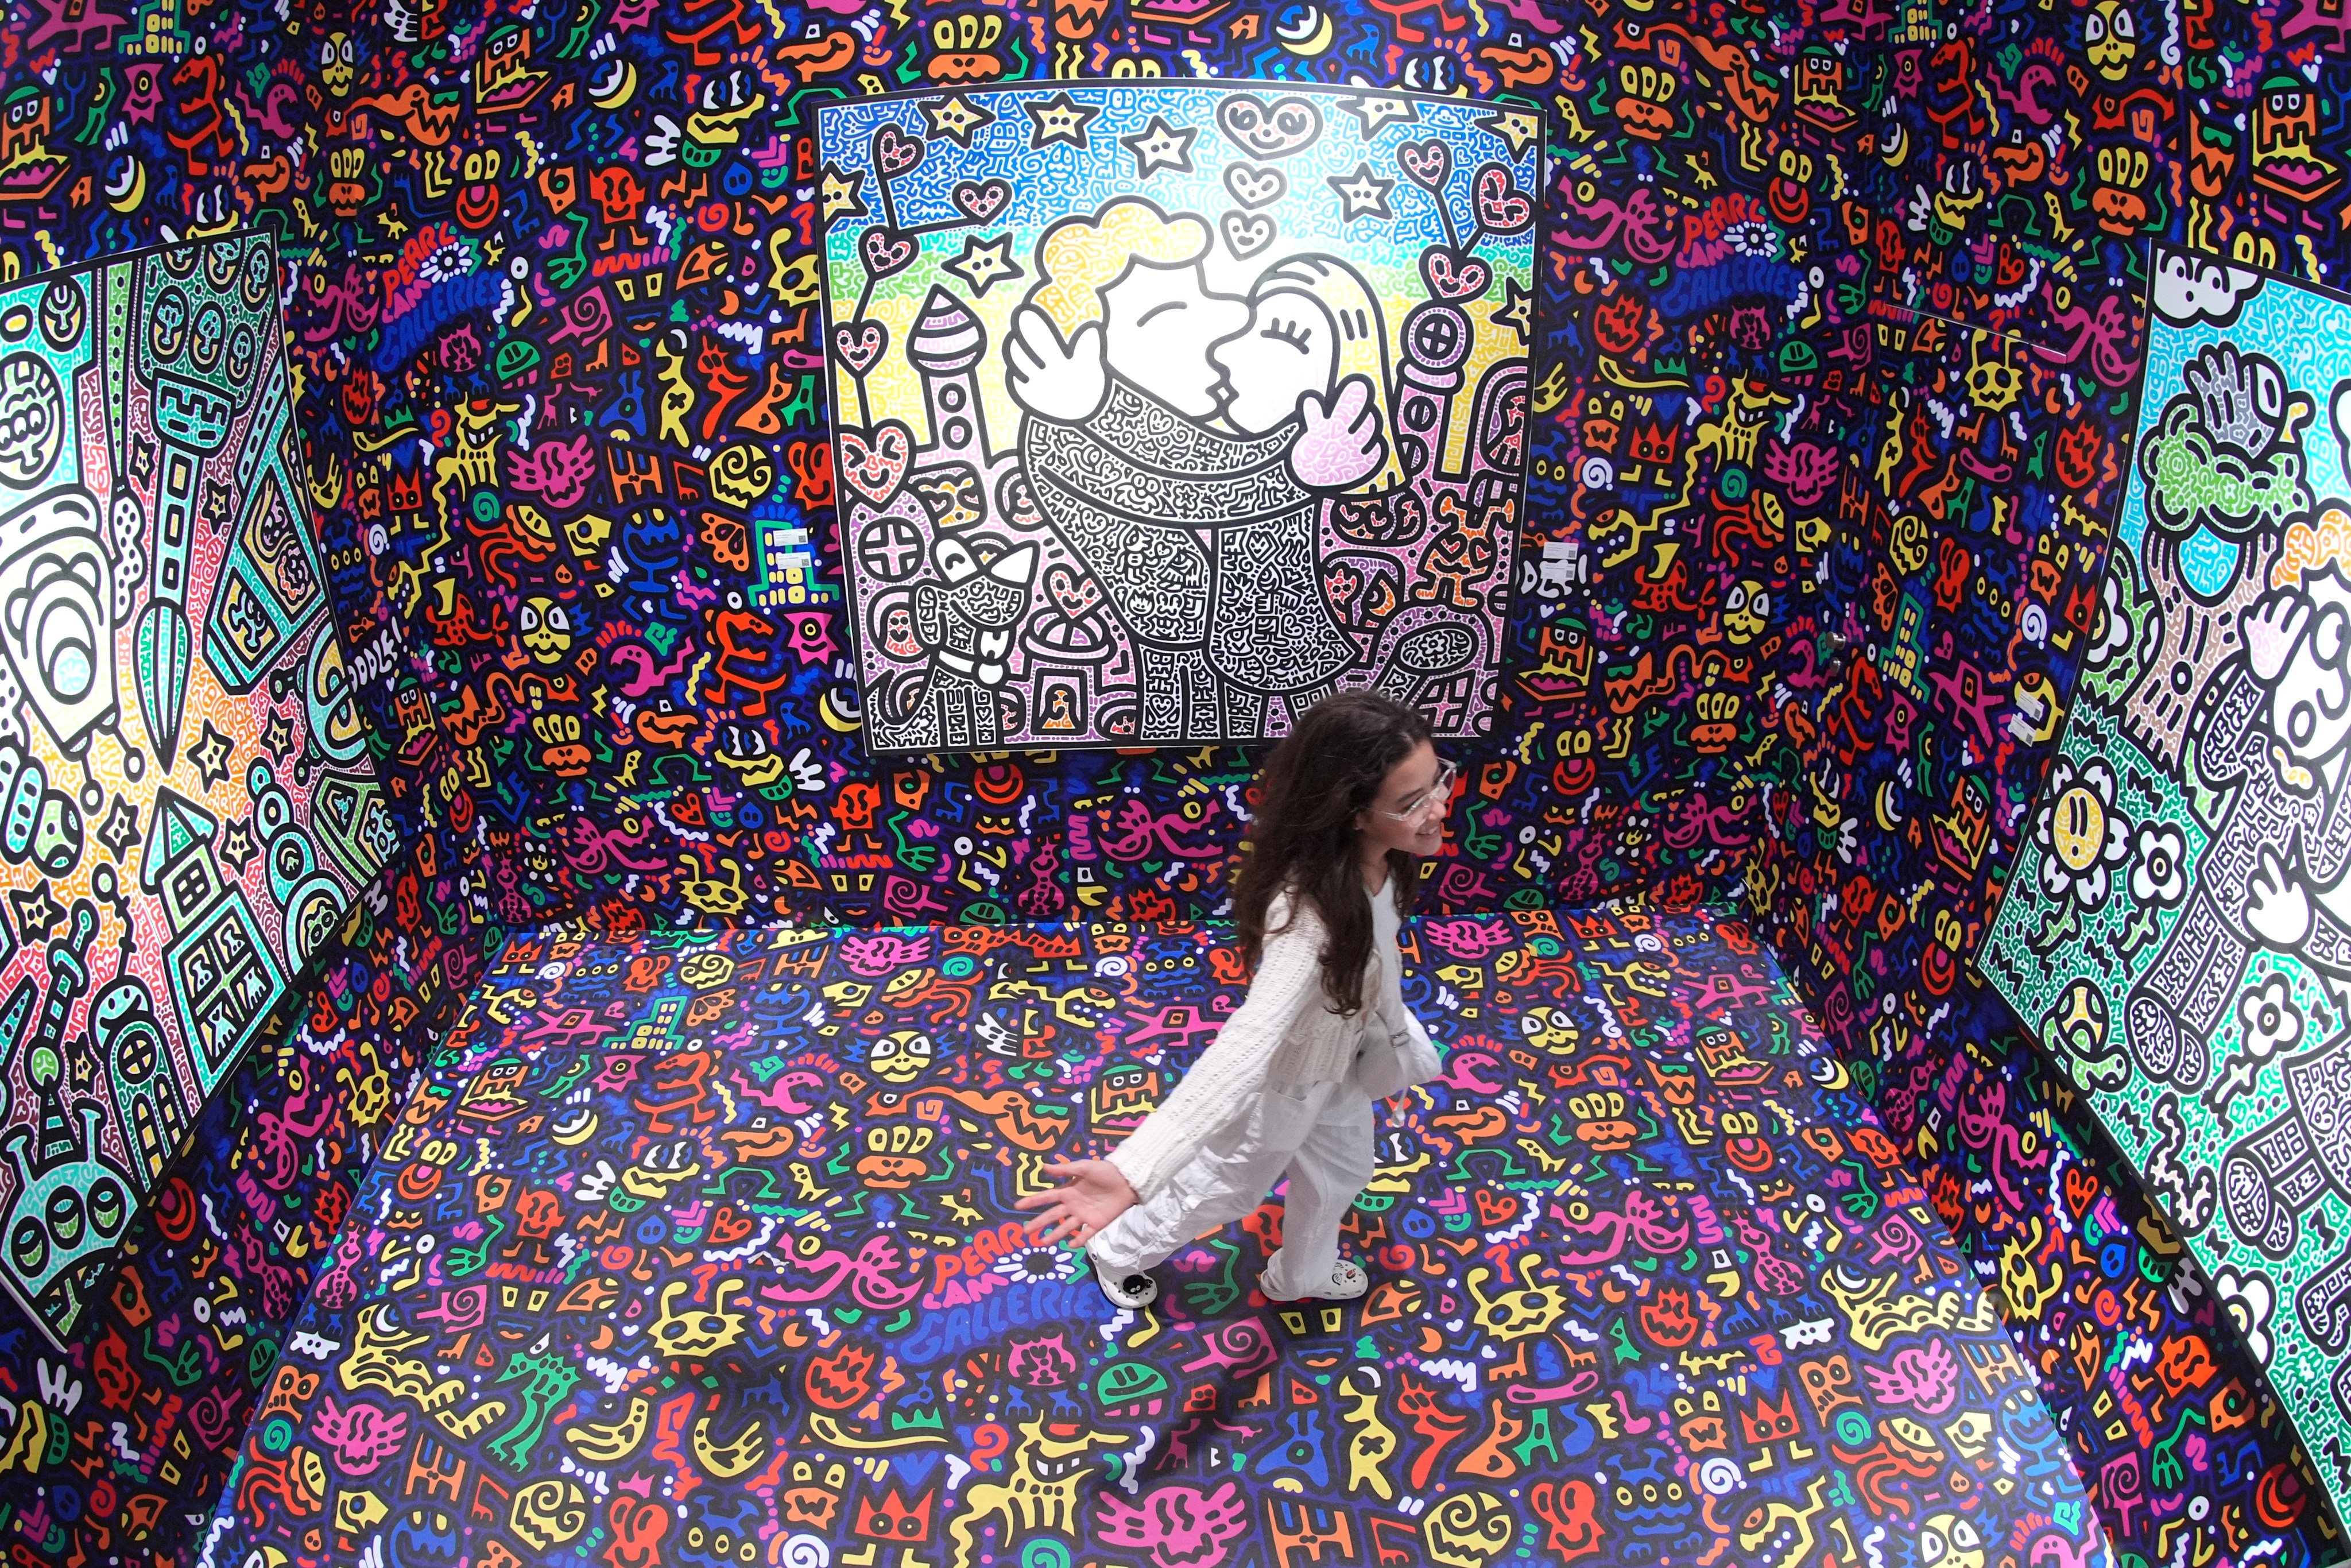 A visitor poses for a photo next to the artwork titled “Mas jumps in his Vortex to DoodleLand” by Mr Doodle. Photo: Eugene Lee